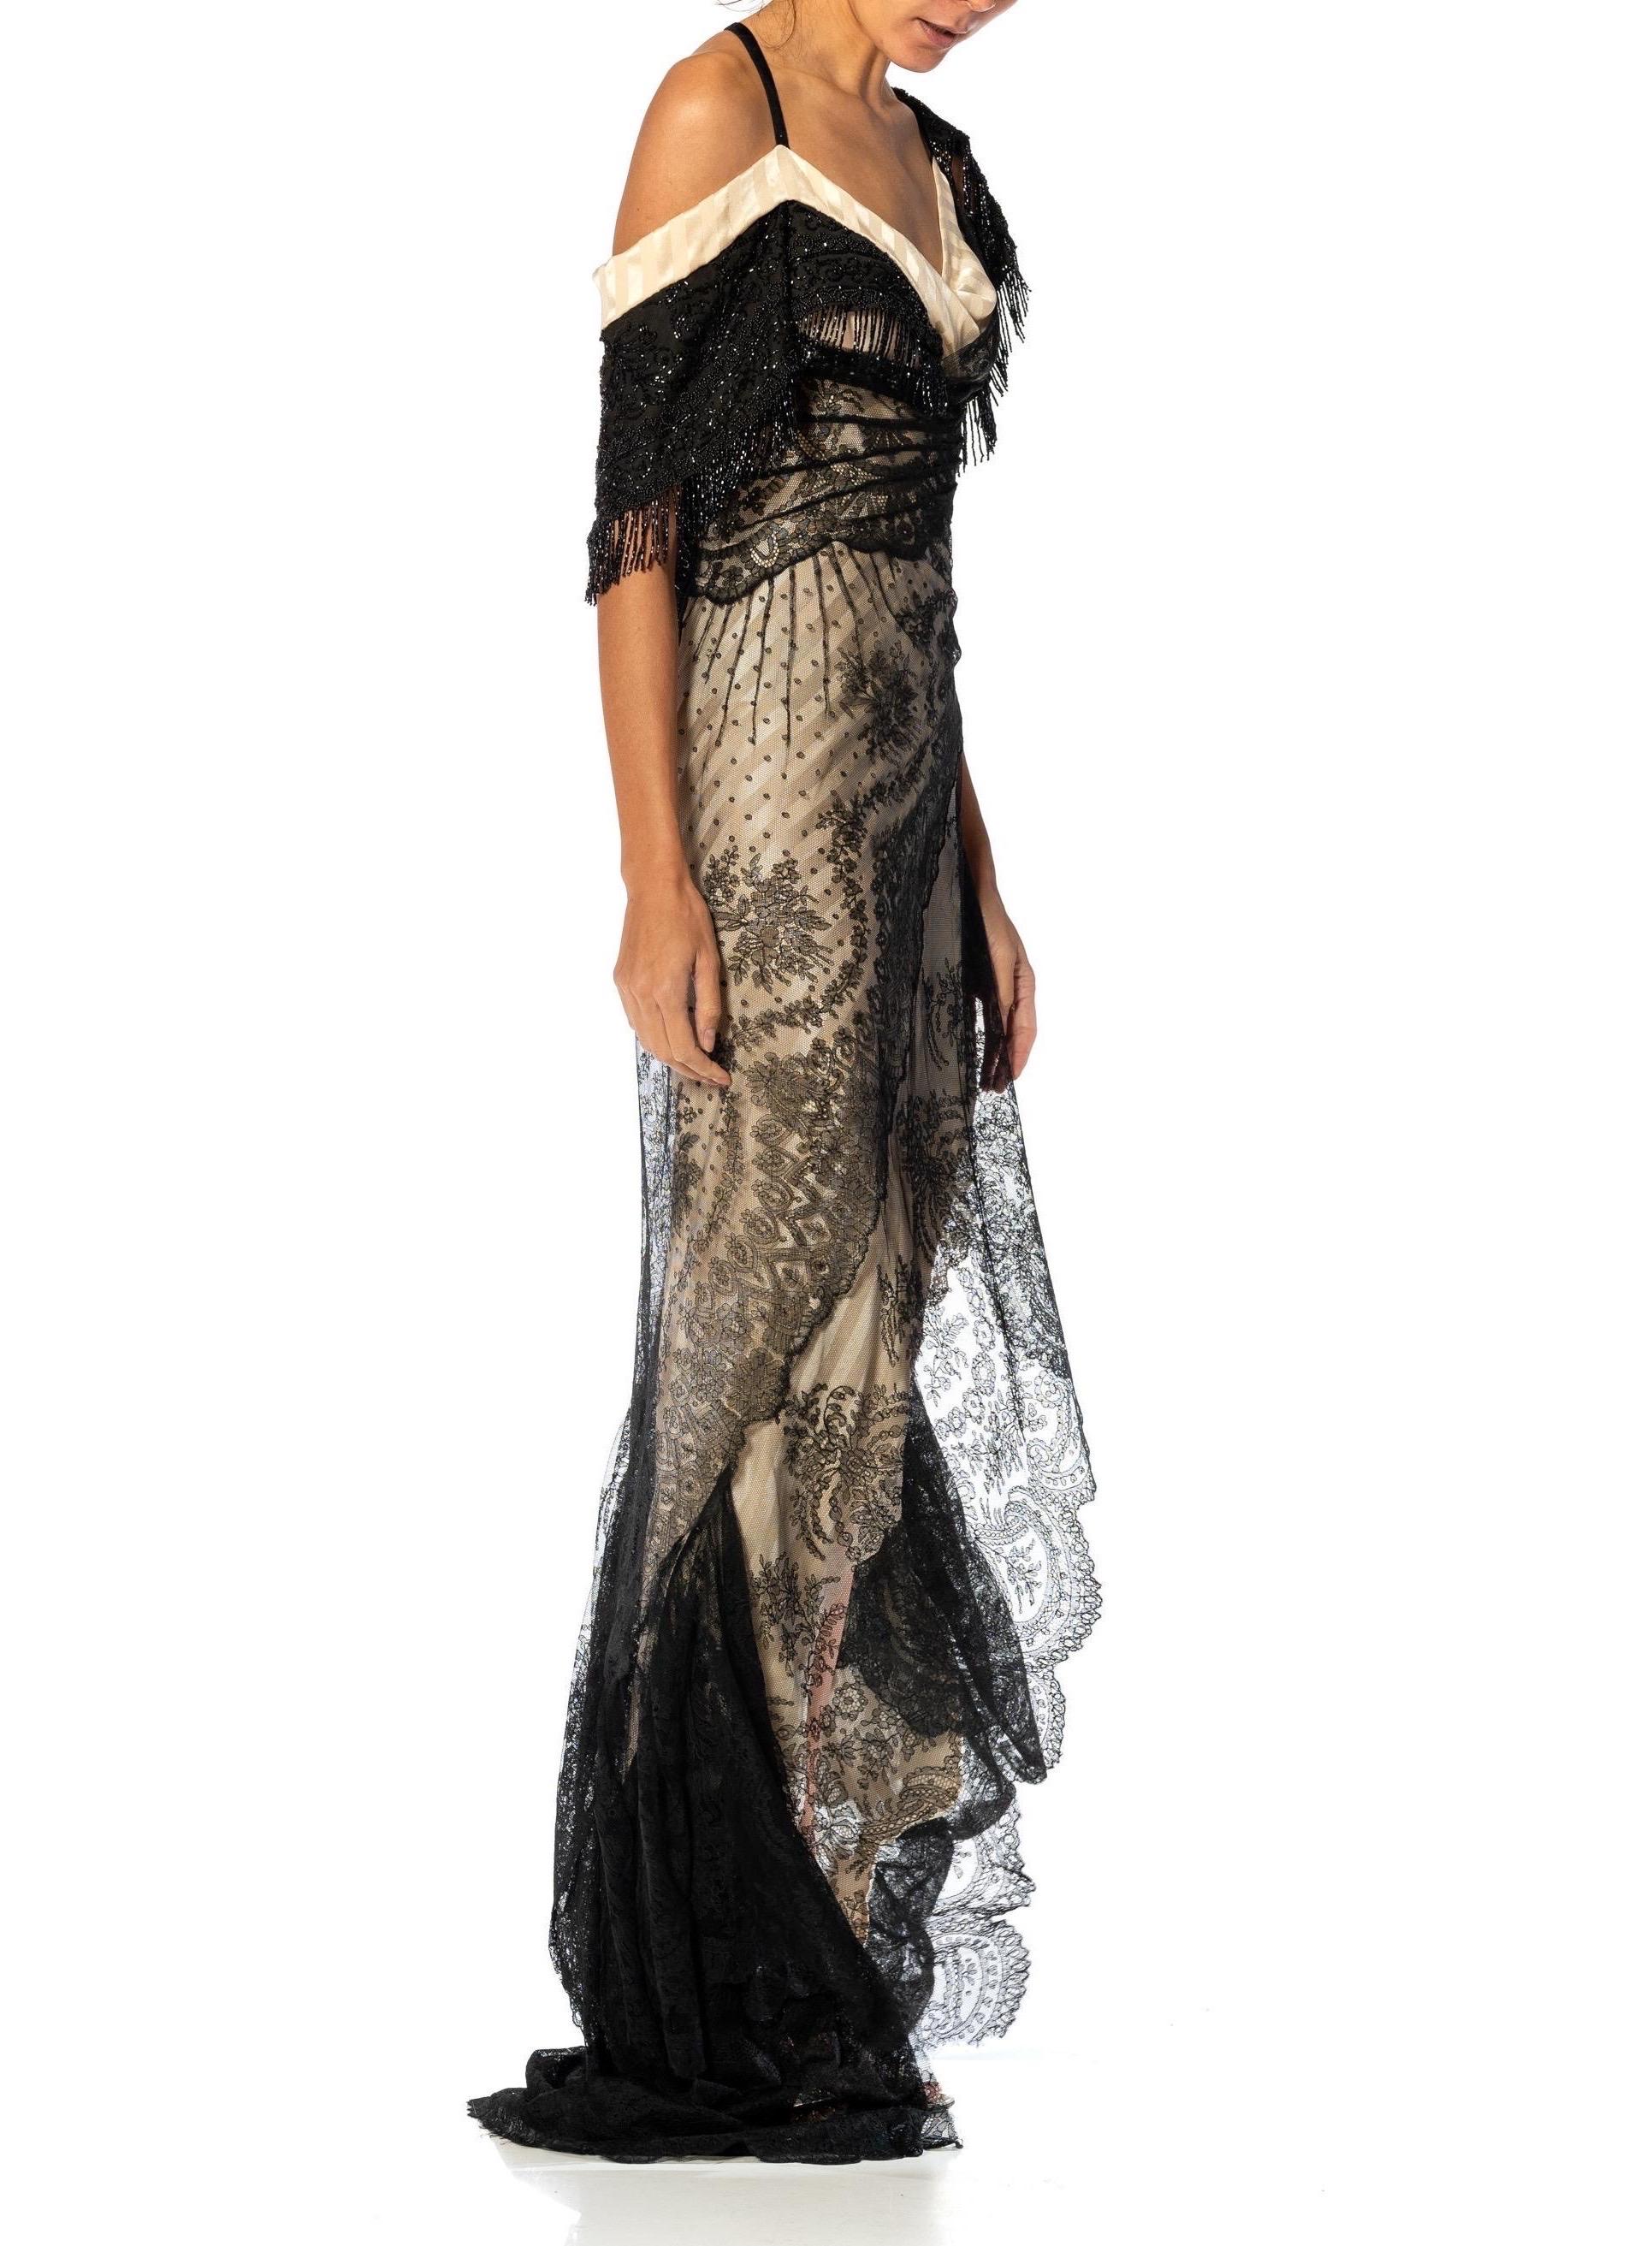 MORPHEW ATELIER Black & Cream Silk Chantilly Lace Trained Gown With Victorian B For Sale 13